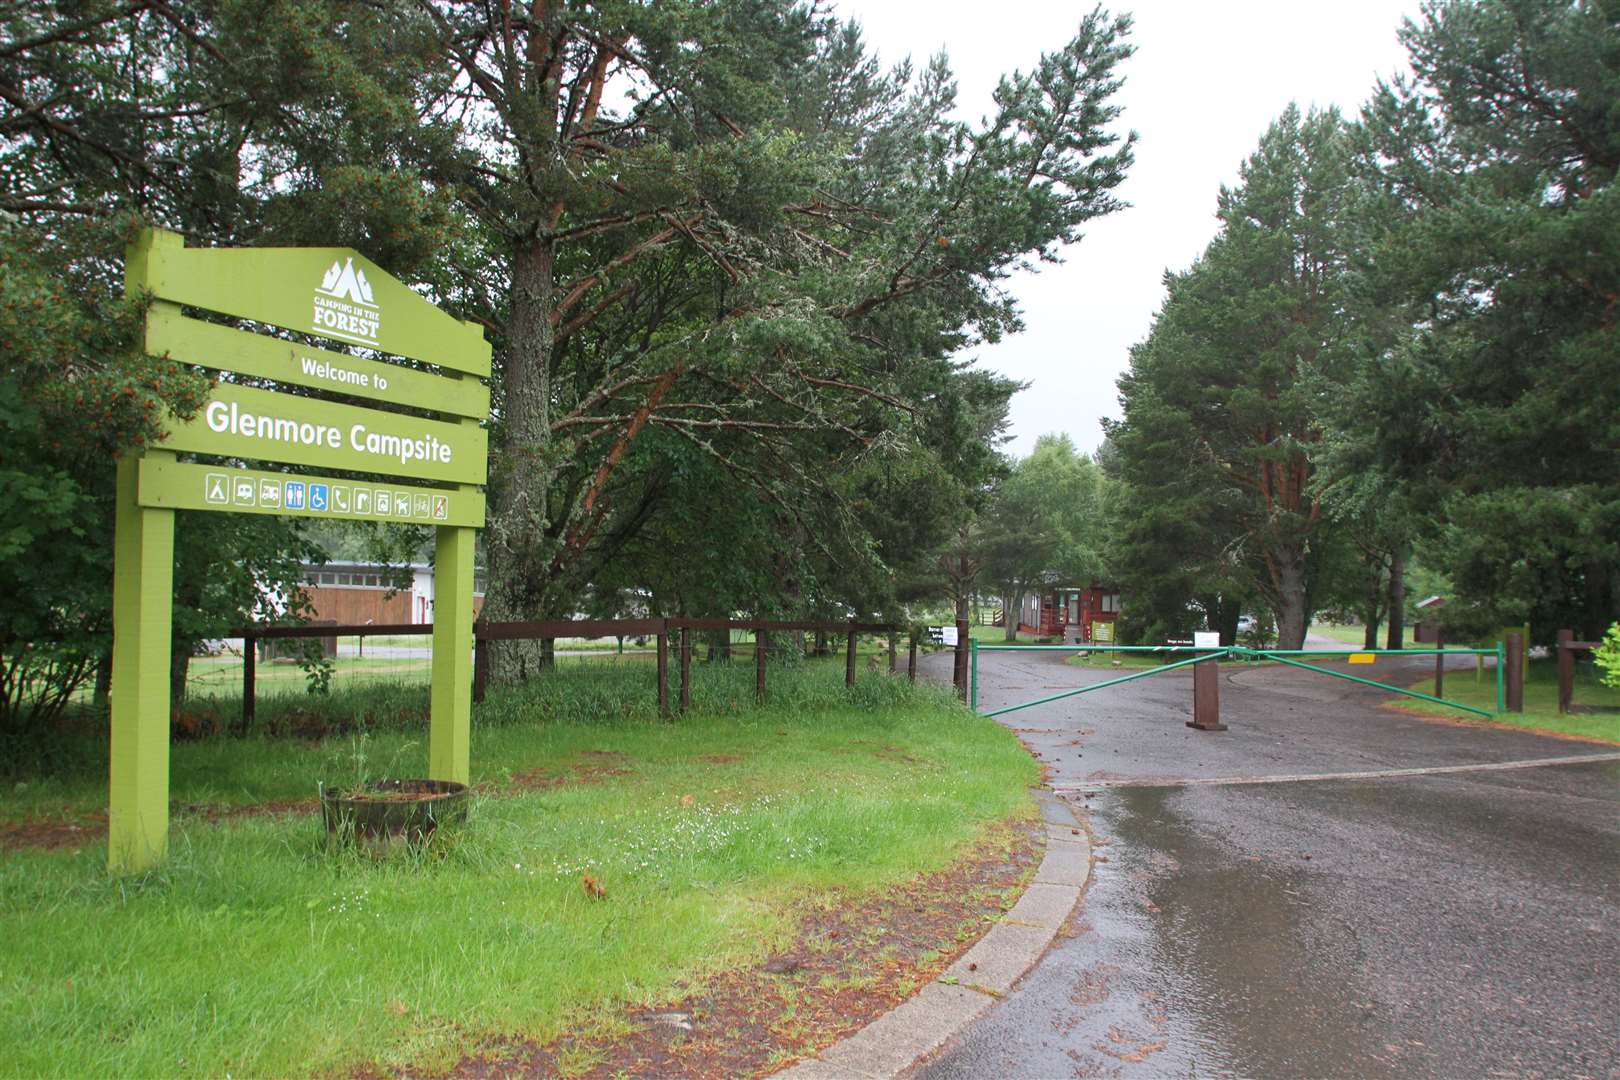 The gates are set to be locked at Glenmore Campsite until 2021.